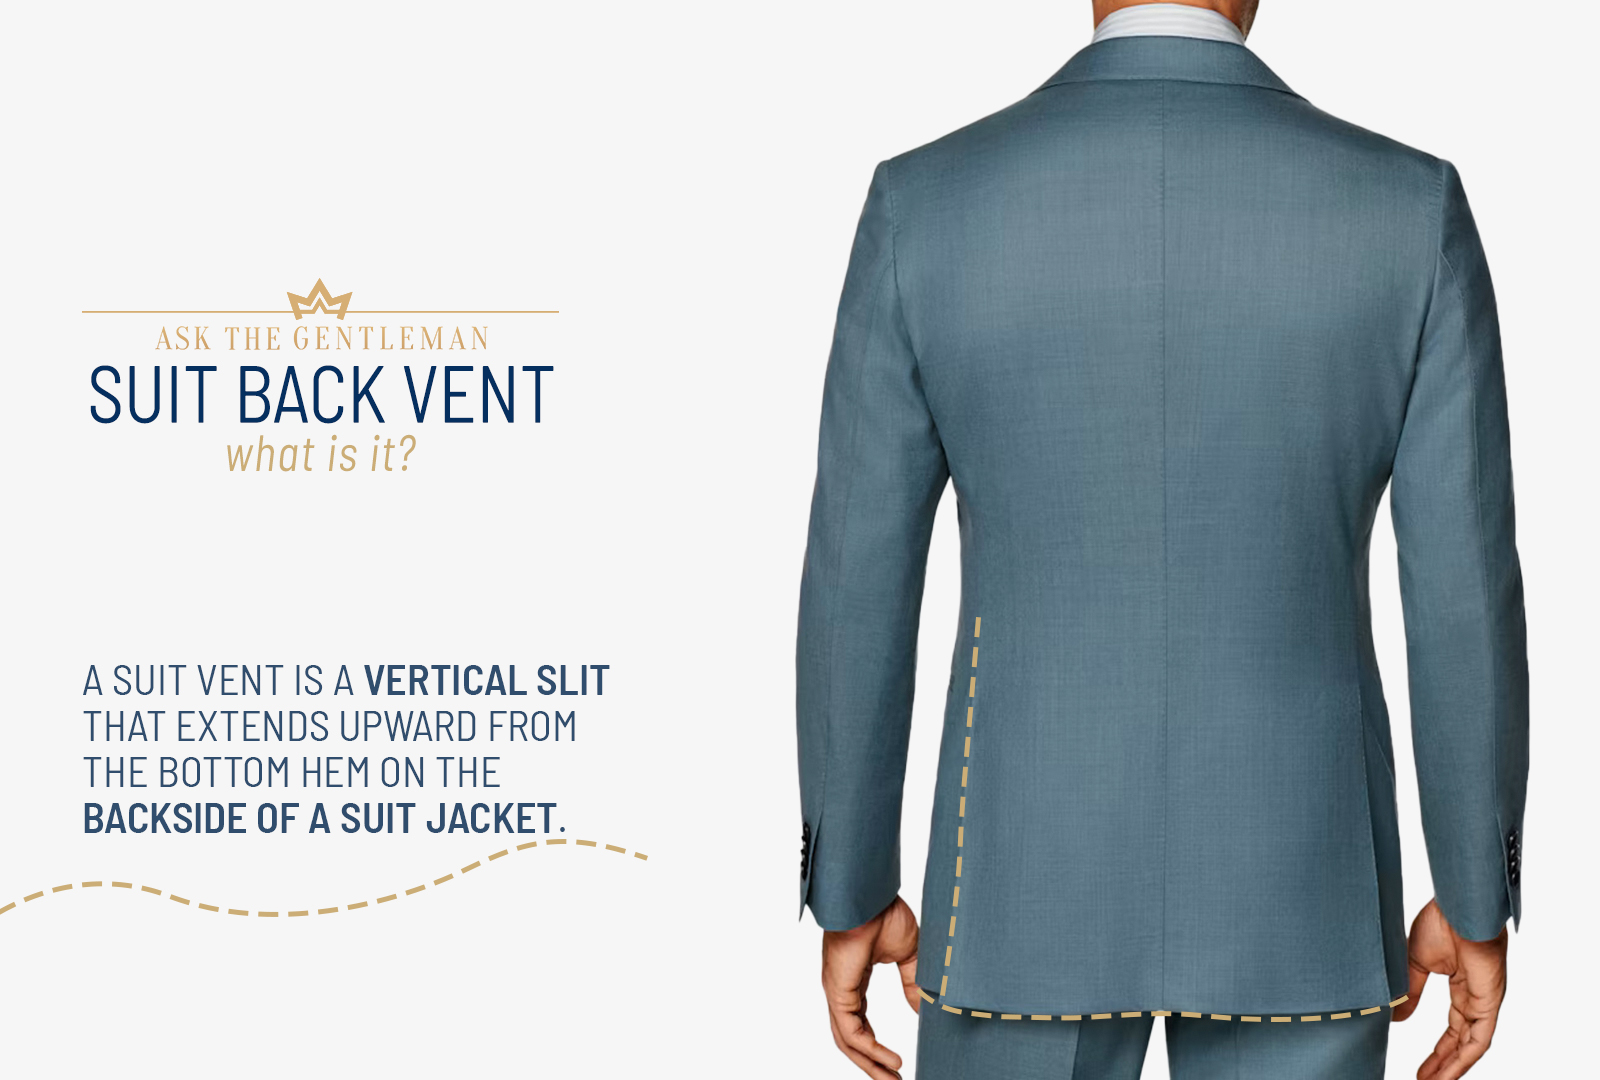 What are suit back vents?